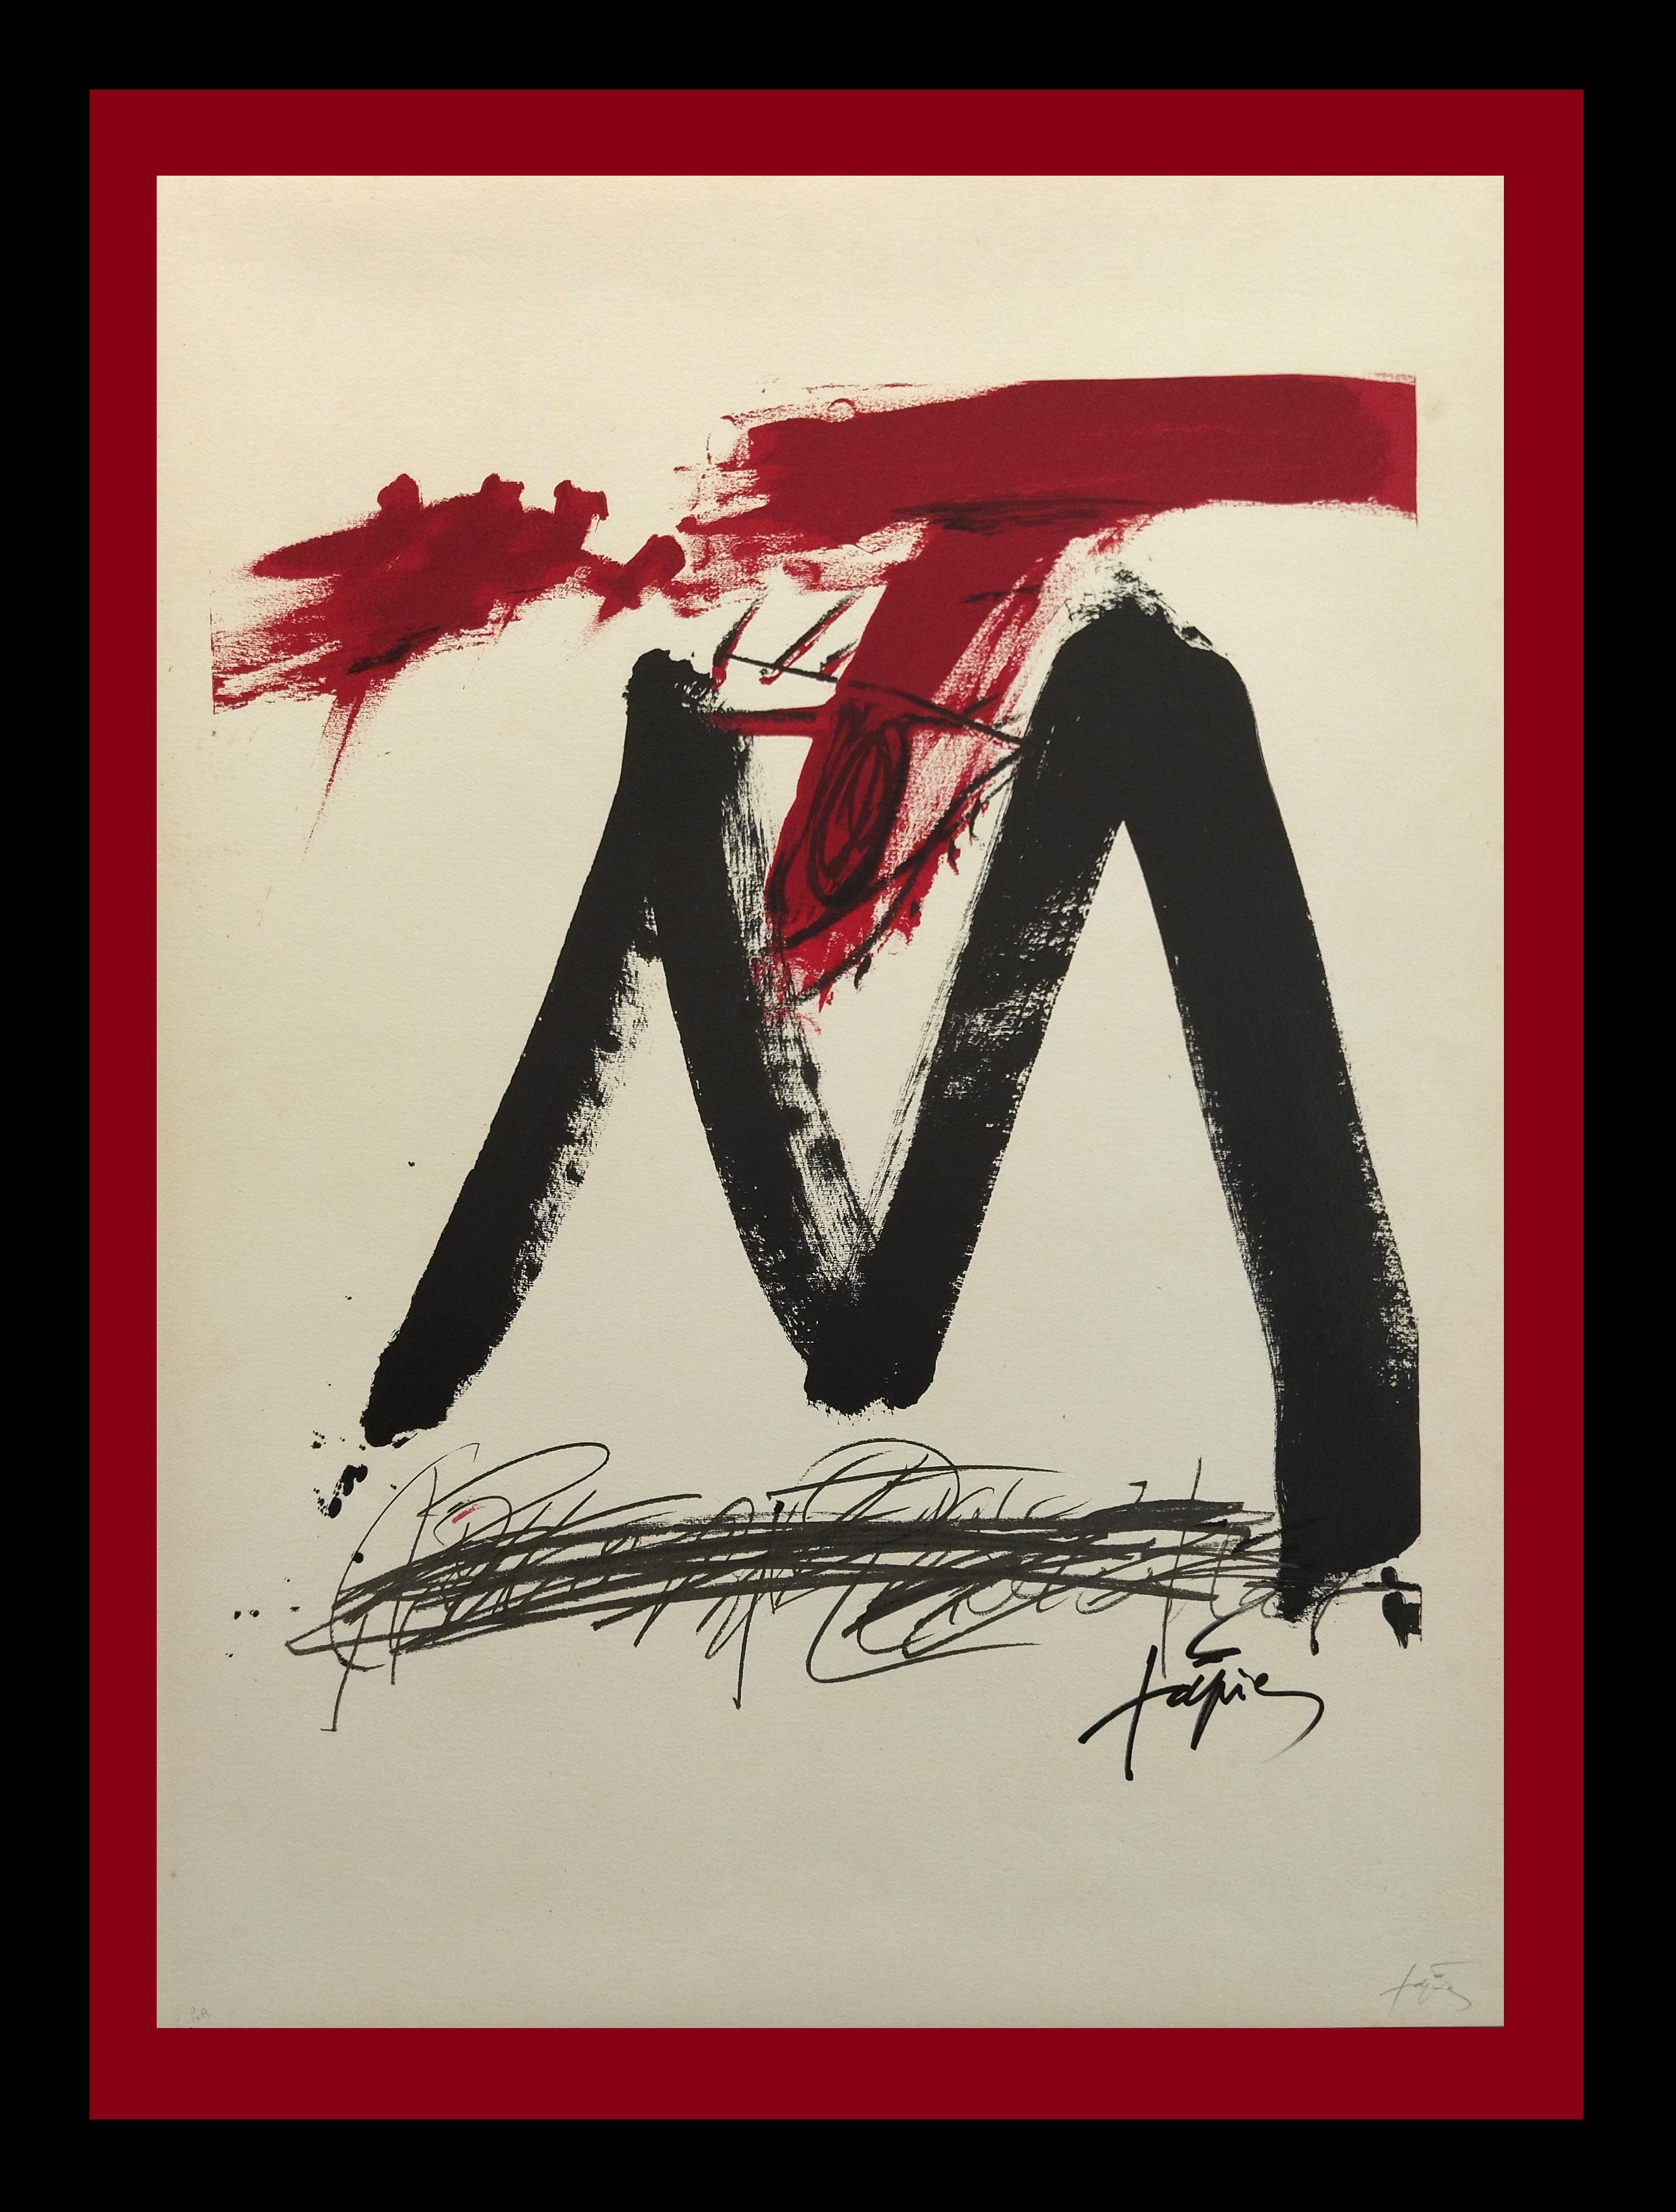 Antoni Tàpies Abstract Print - Tapies   Vertical  Red  Black  original lithograph abstract painting